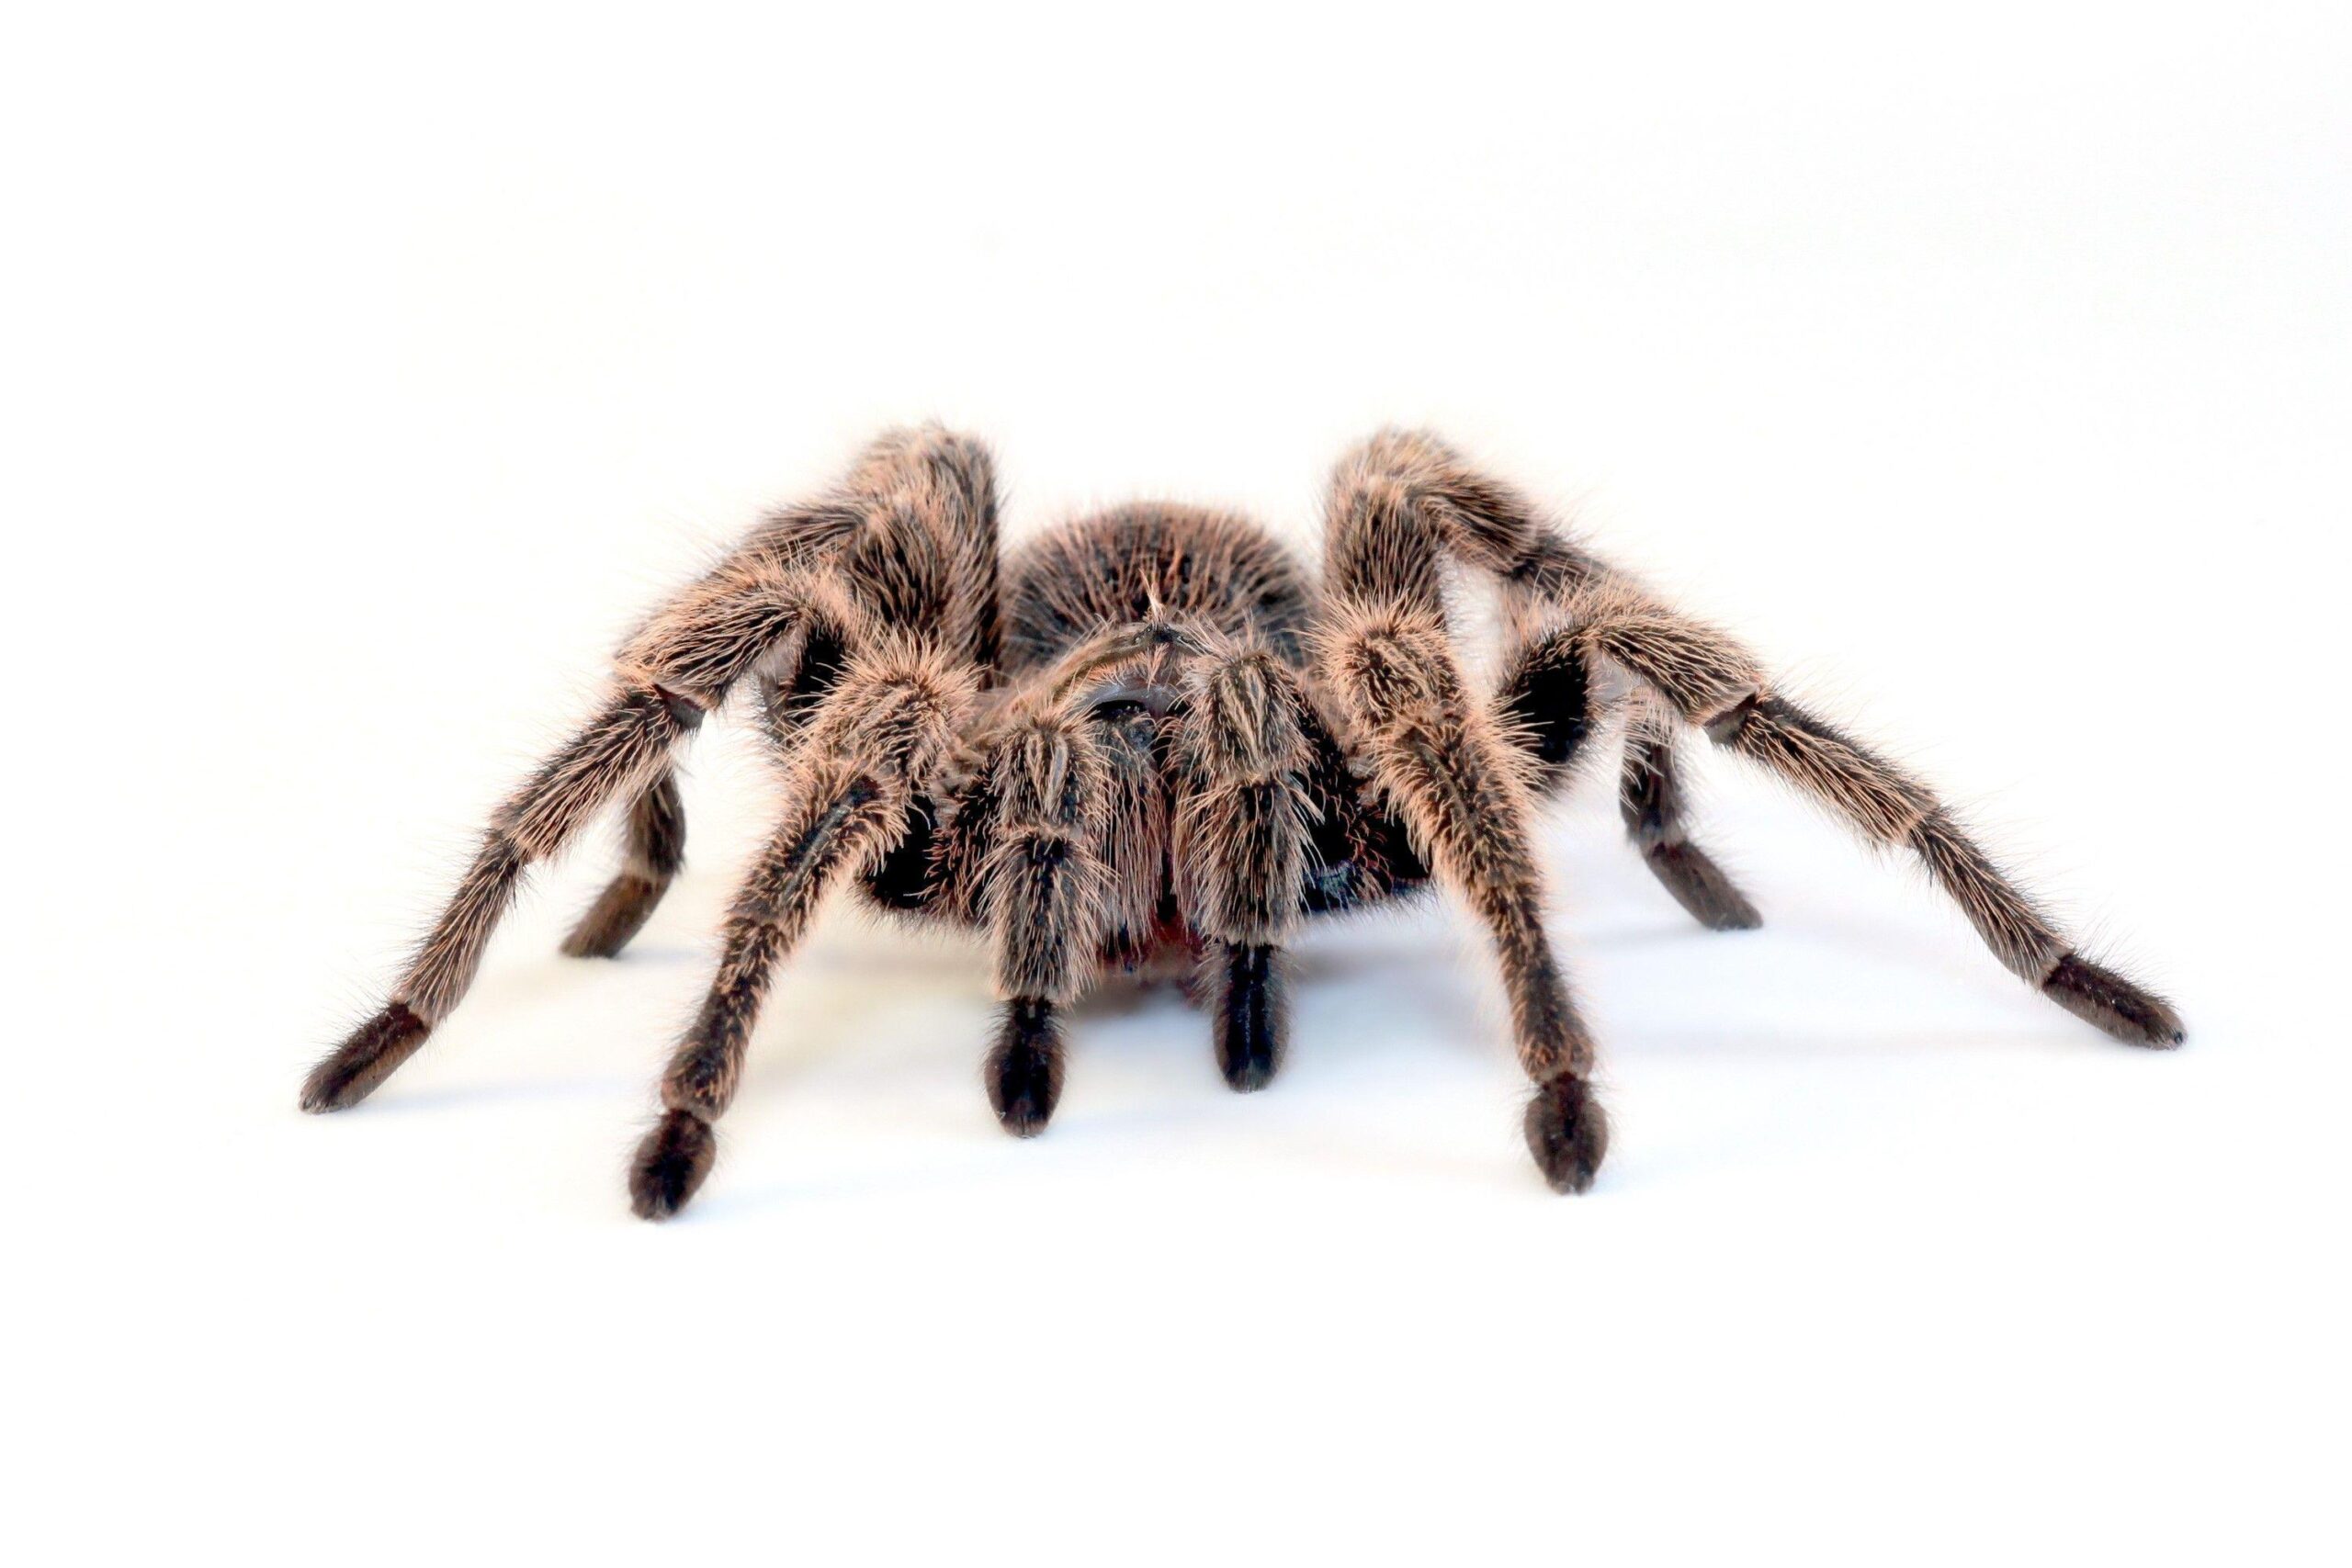 spiders, simple background, tarantula, white backgrounds :: Wallpapers